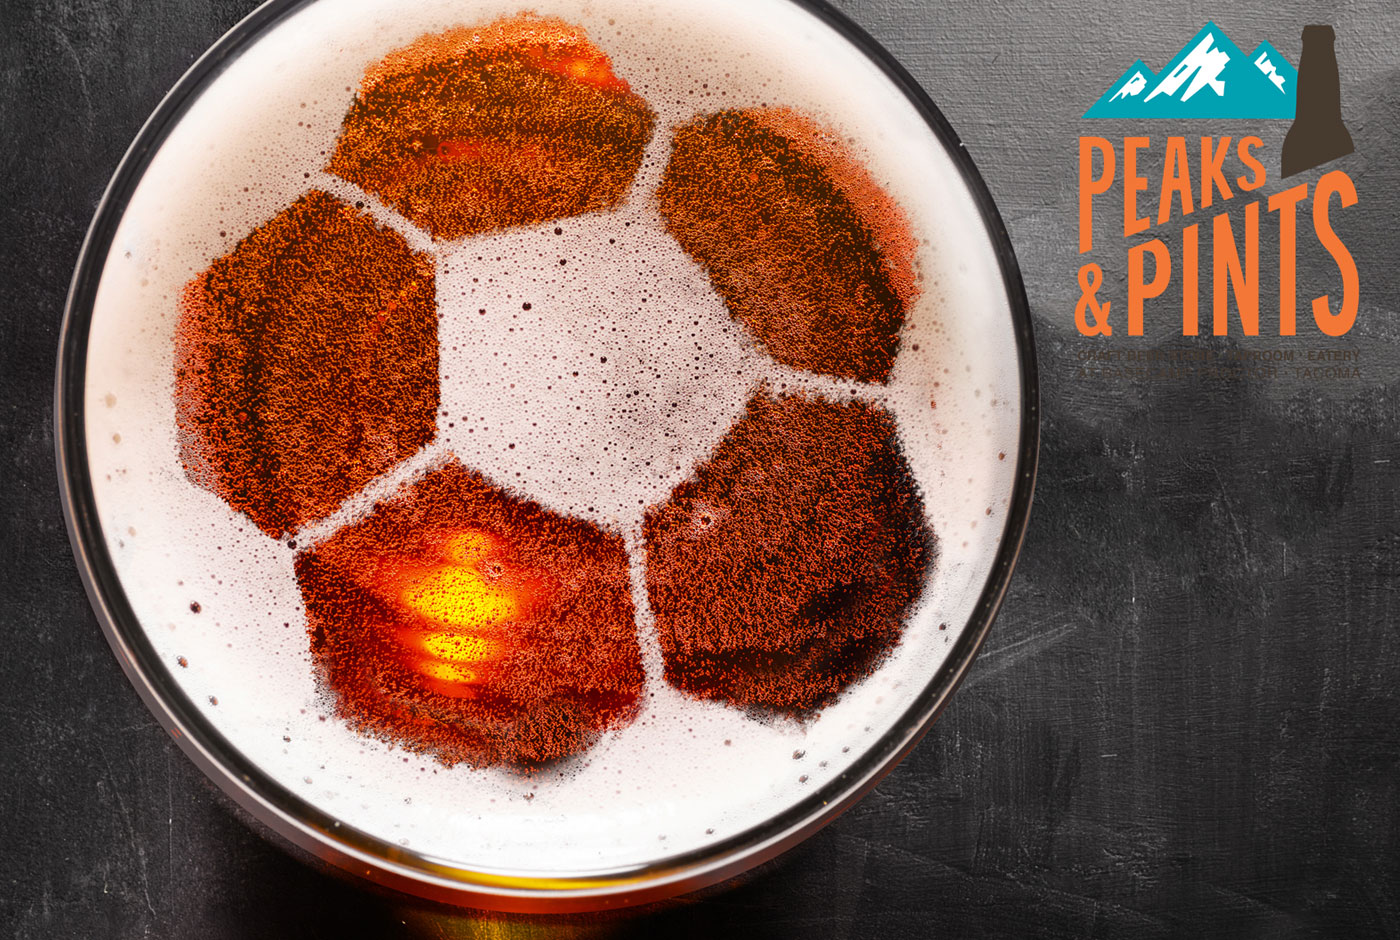 Womens-World-Cup-Final-at-Peaks-and-Pints-Calendar